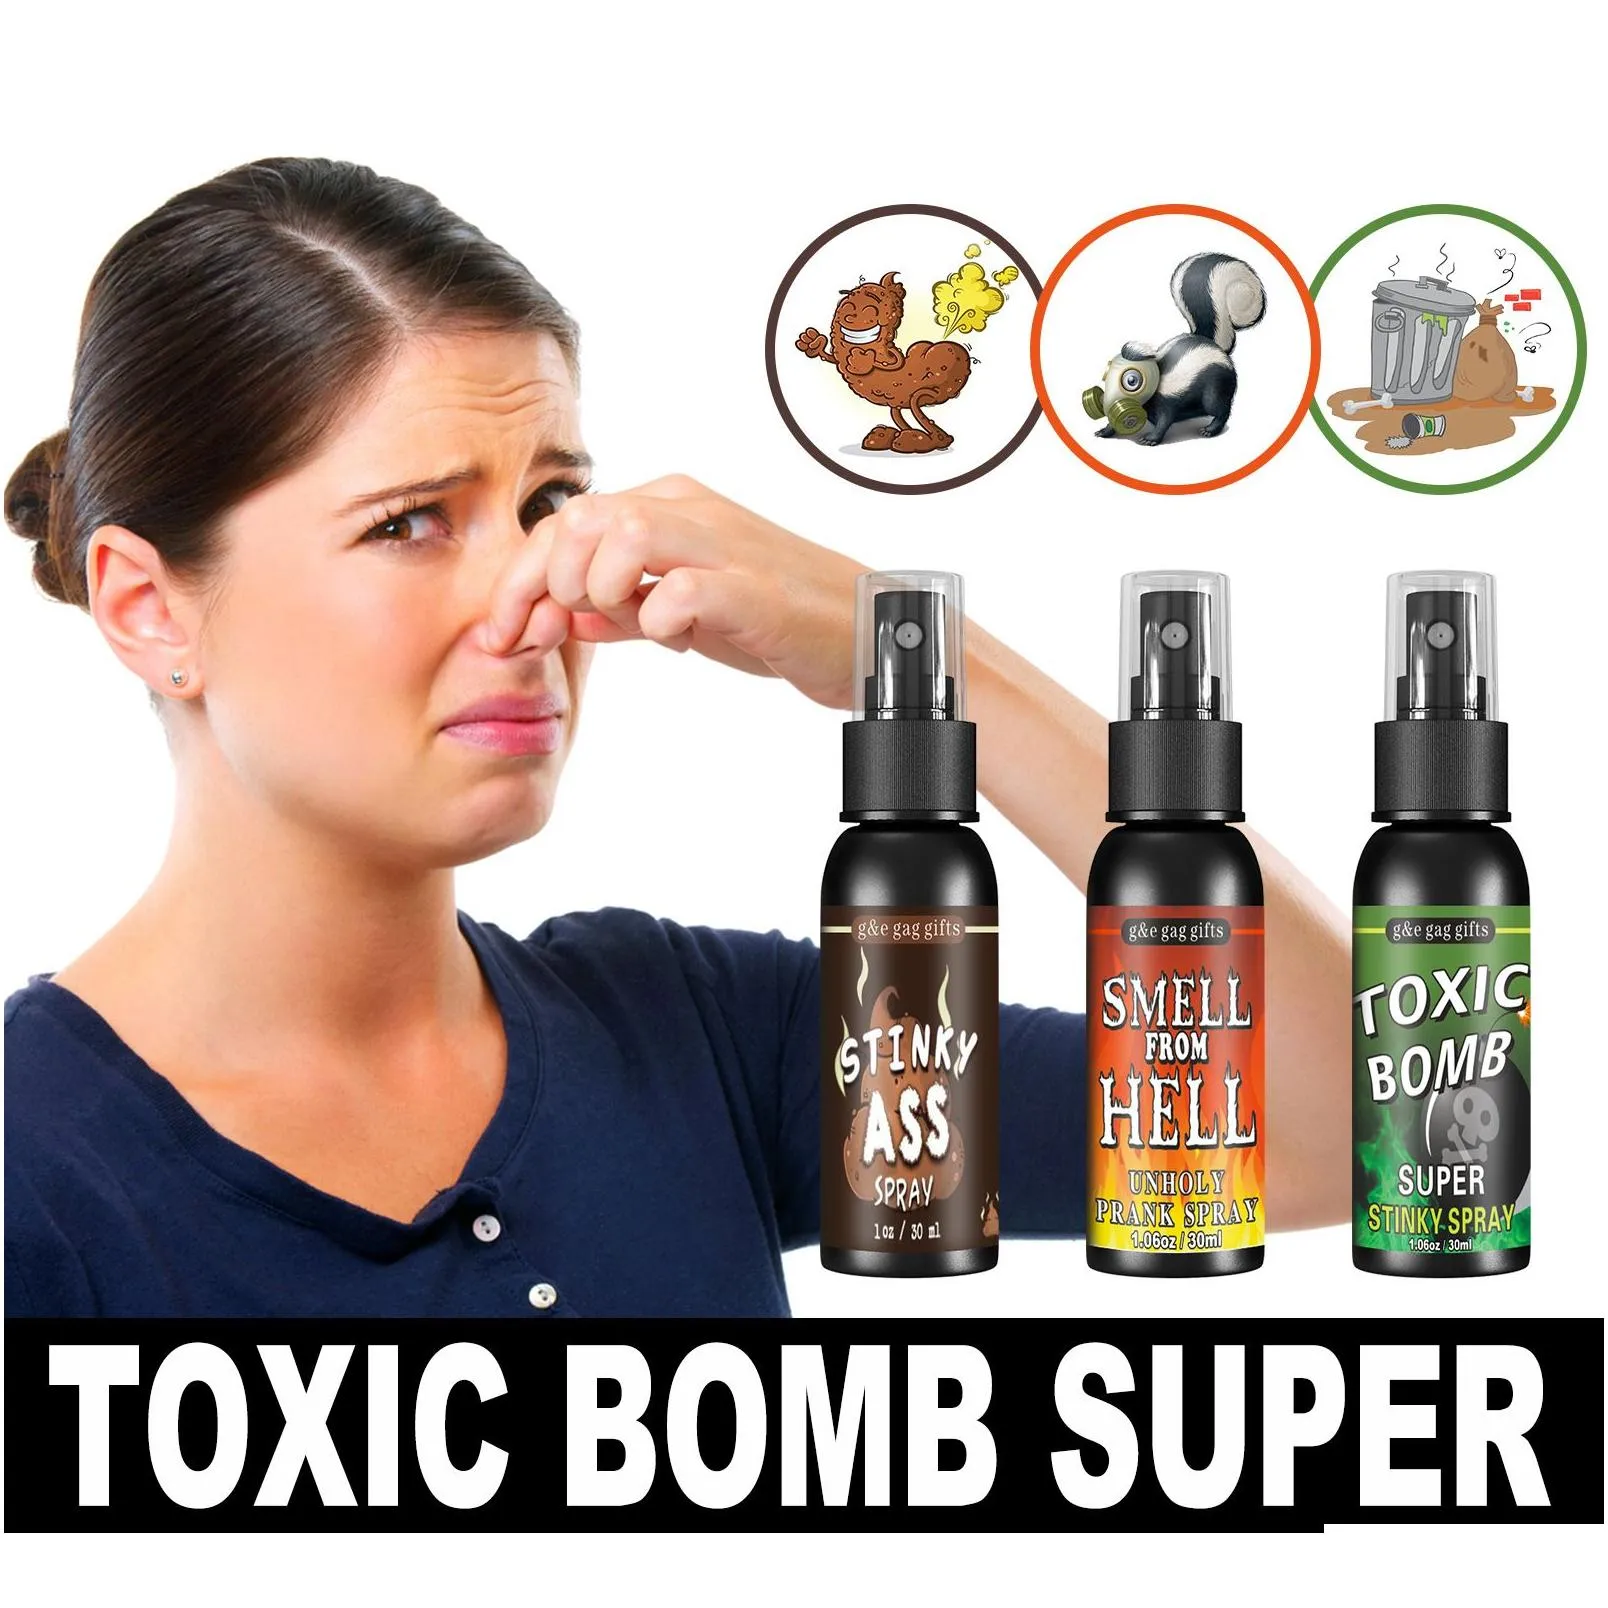 Other Festive & Party Supplies Surprise Strong Stink Spray Smelly Joke Prank Liquid Ass Fart For Kids And Family Home Garden Festive P Dhjio